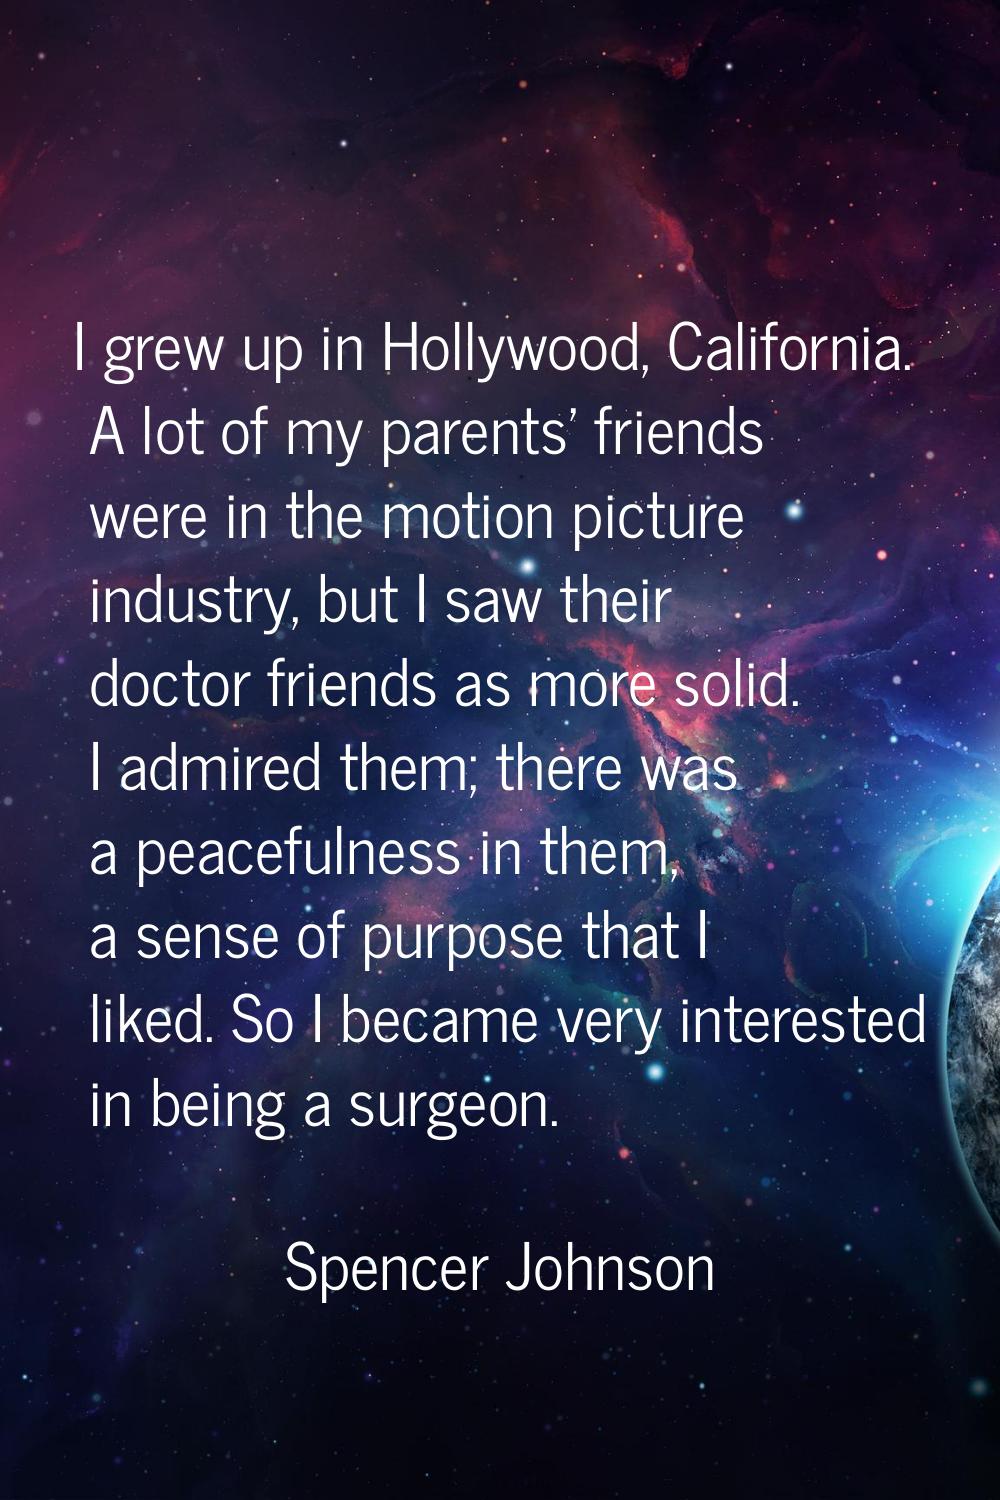 I grew up in Hollywood, California. A lot of my parents' friends were in the motion picture industr